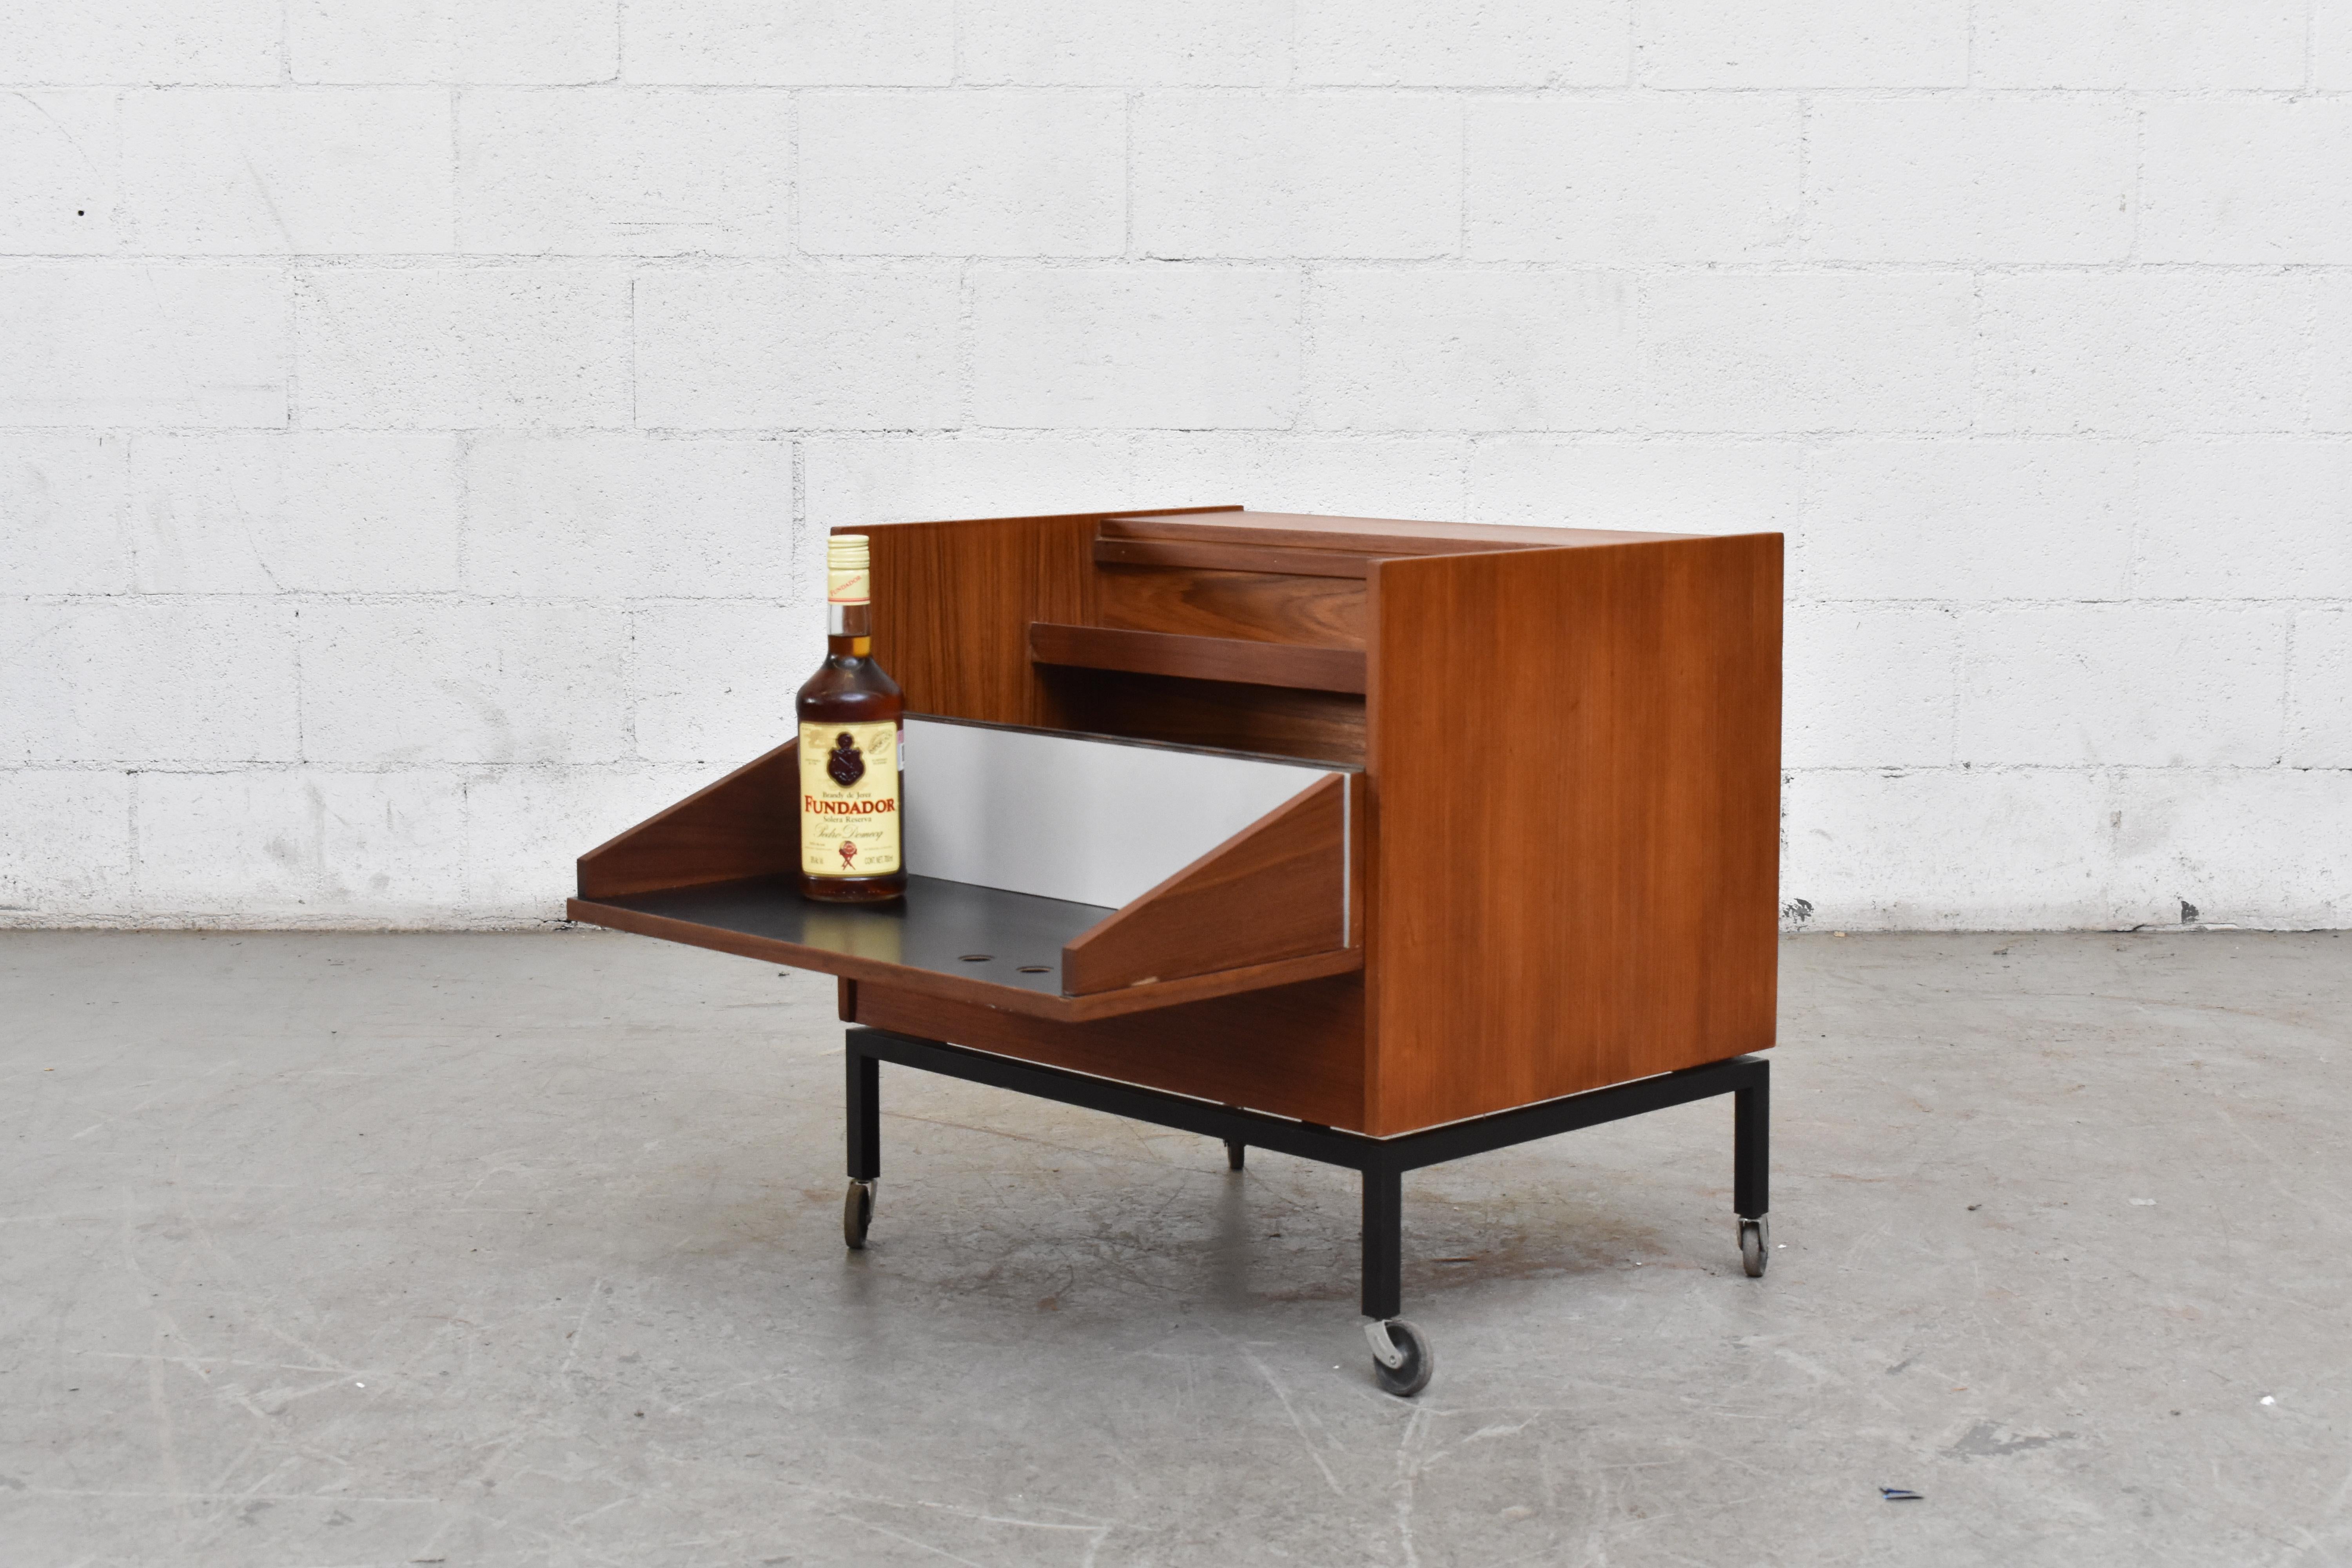 Swedish trolley bar. Lightly refinished teak body with black formica exterior. Teak and white formica interior. Both sides open to reveal interior bar storage for glasses, bottles, etc. Black enamelled metal frame with rolling caster wheels.